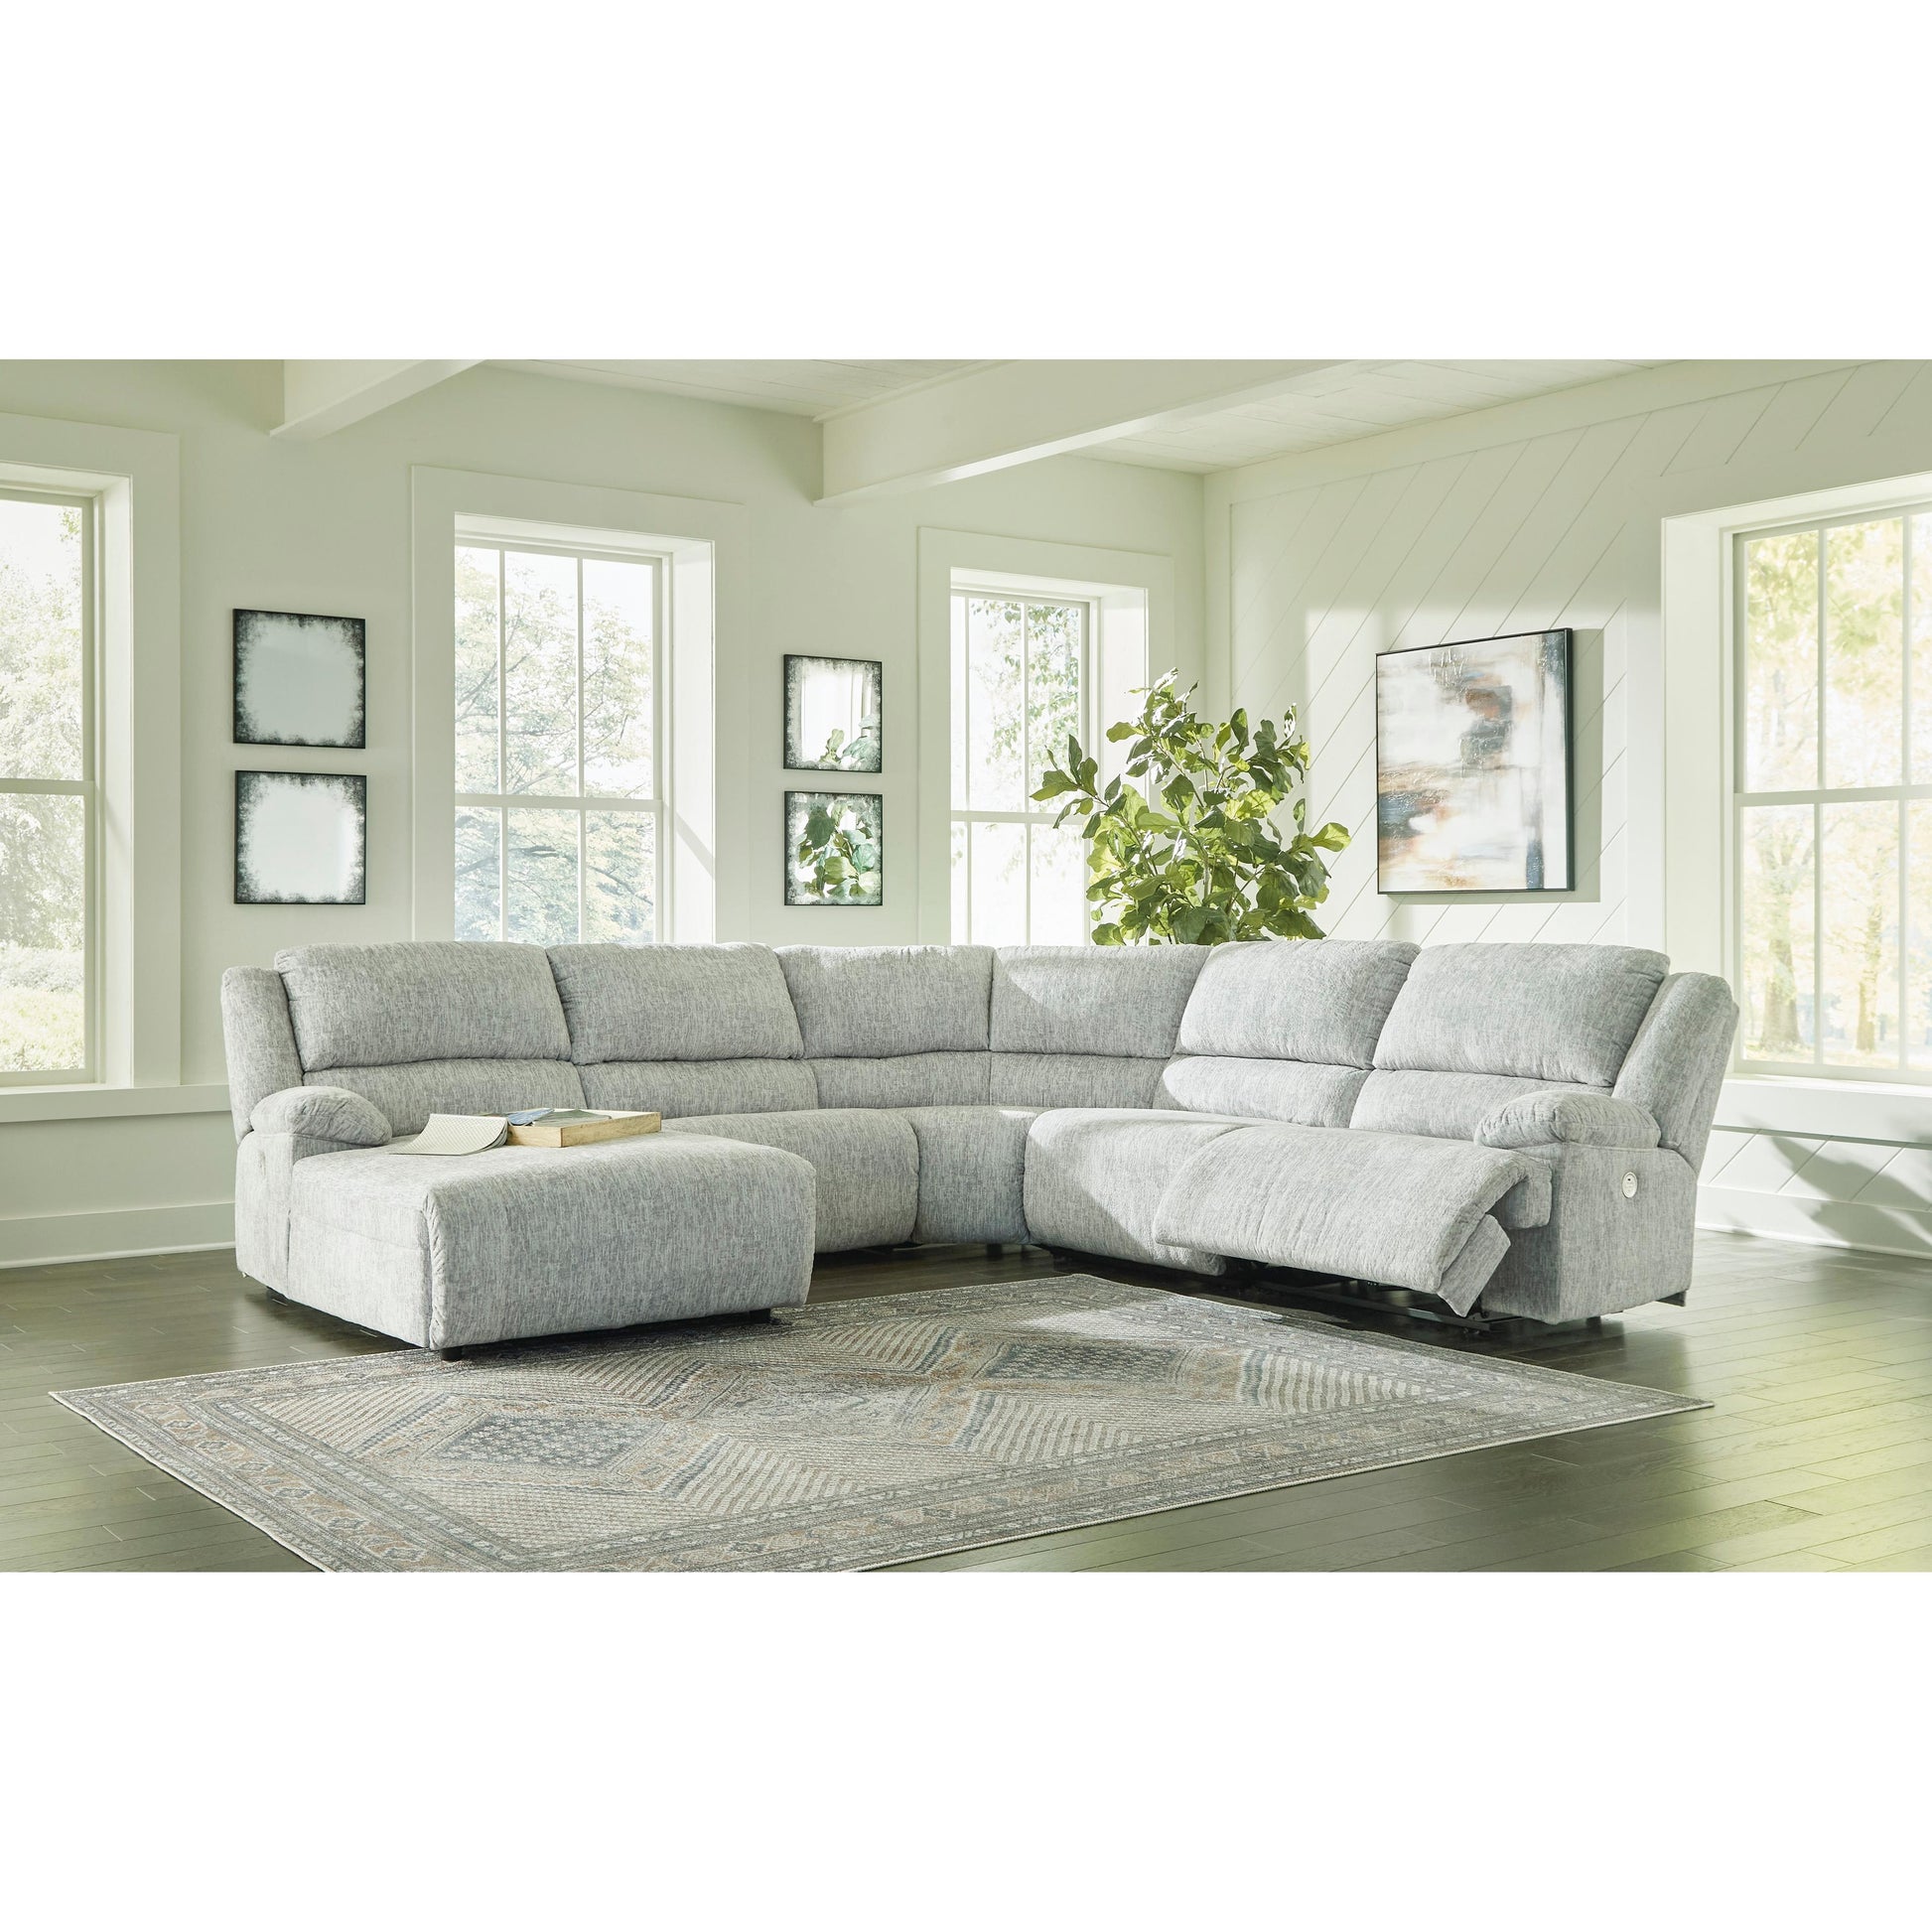 Signature Design by Ashley McClelland Power Reclining Fabric 5 pc Sectional 2930279/2930246/2930277/2930219/2930262 IMAGE 4